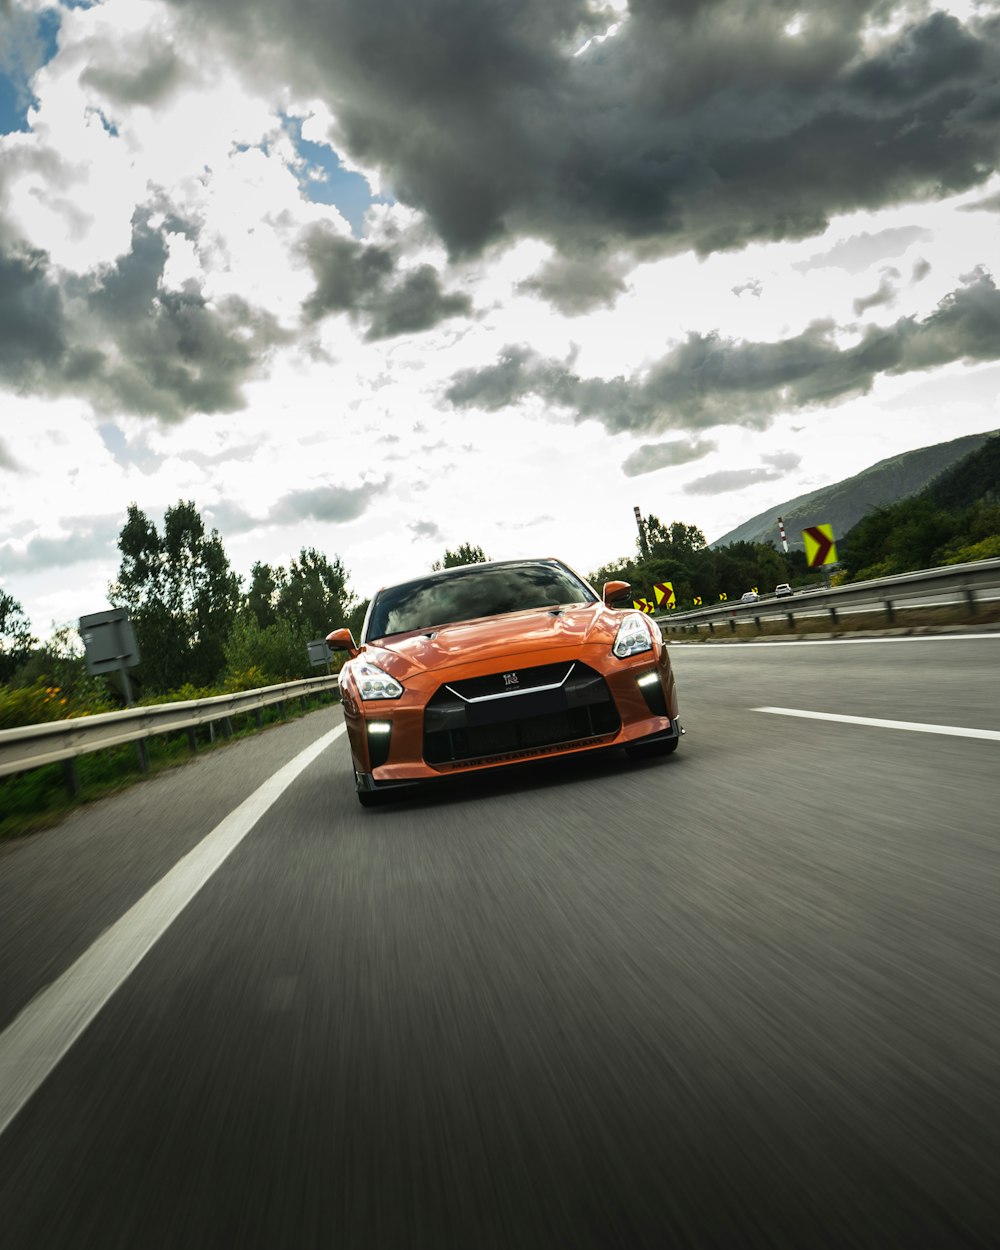 orange car on road under cloudy sky during daytime